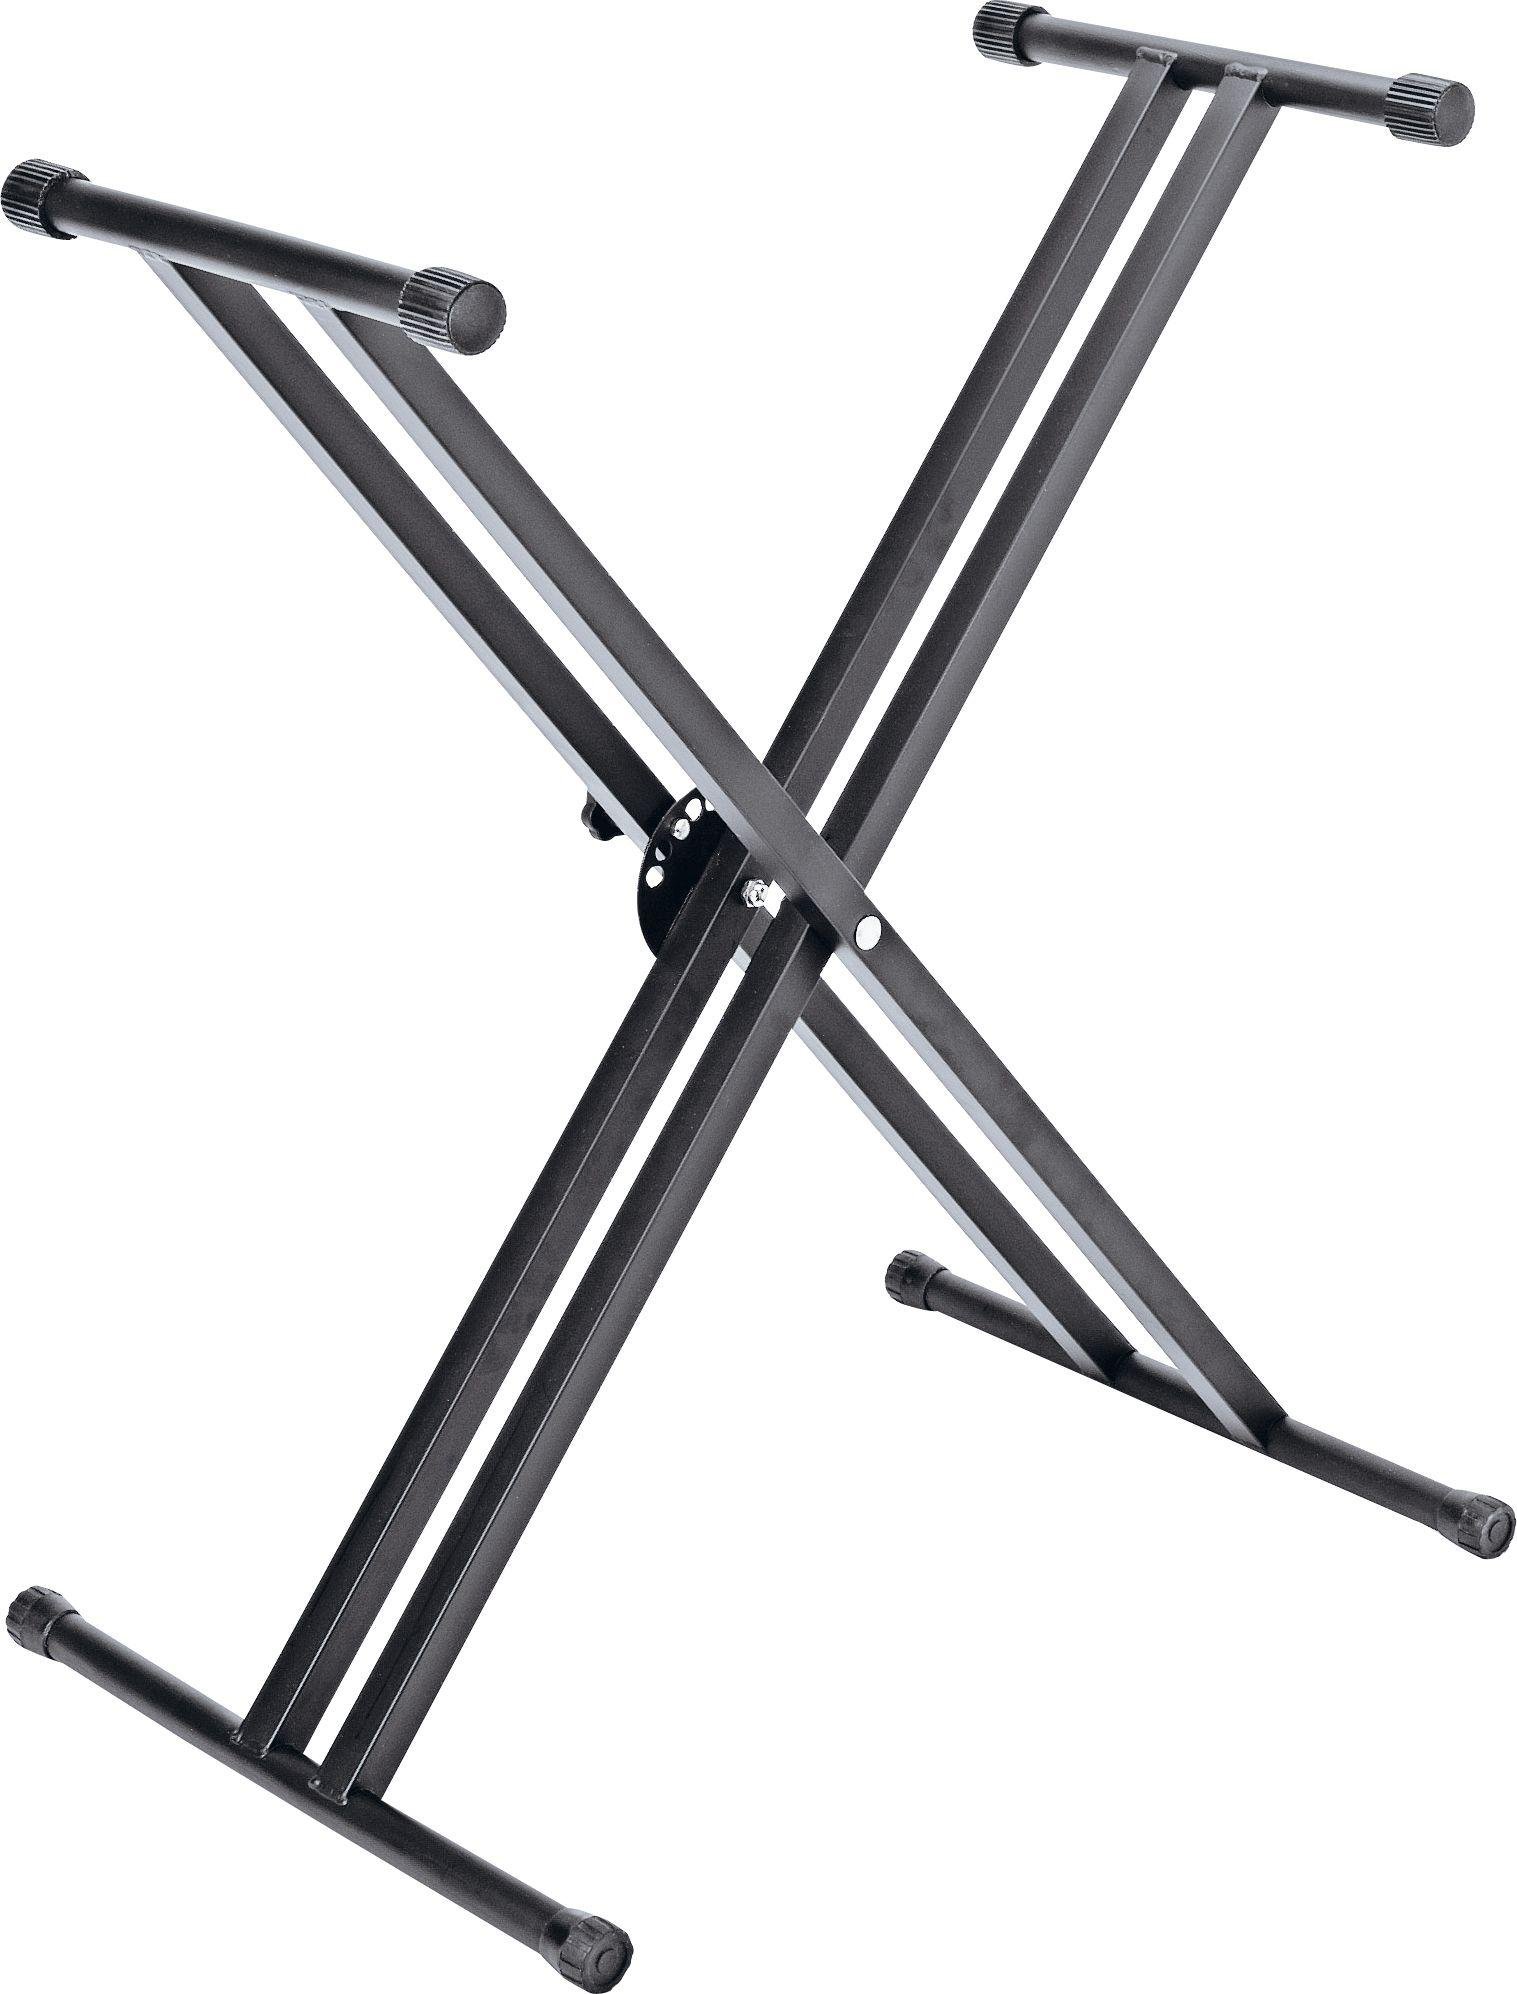 Elevation Full Size Keyboard Stand Reviews